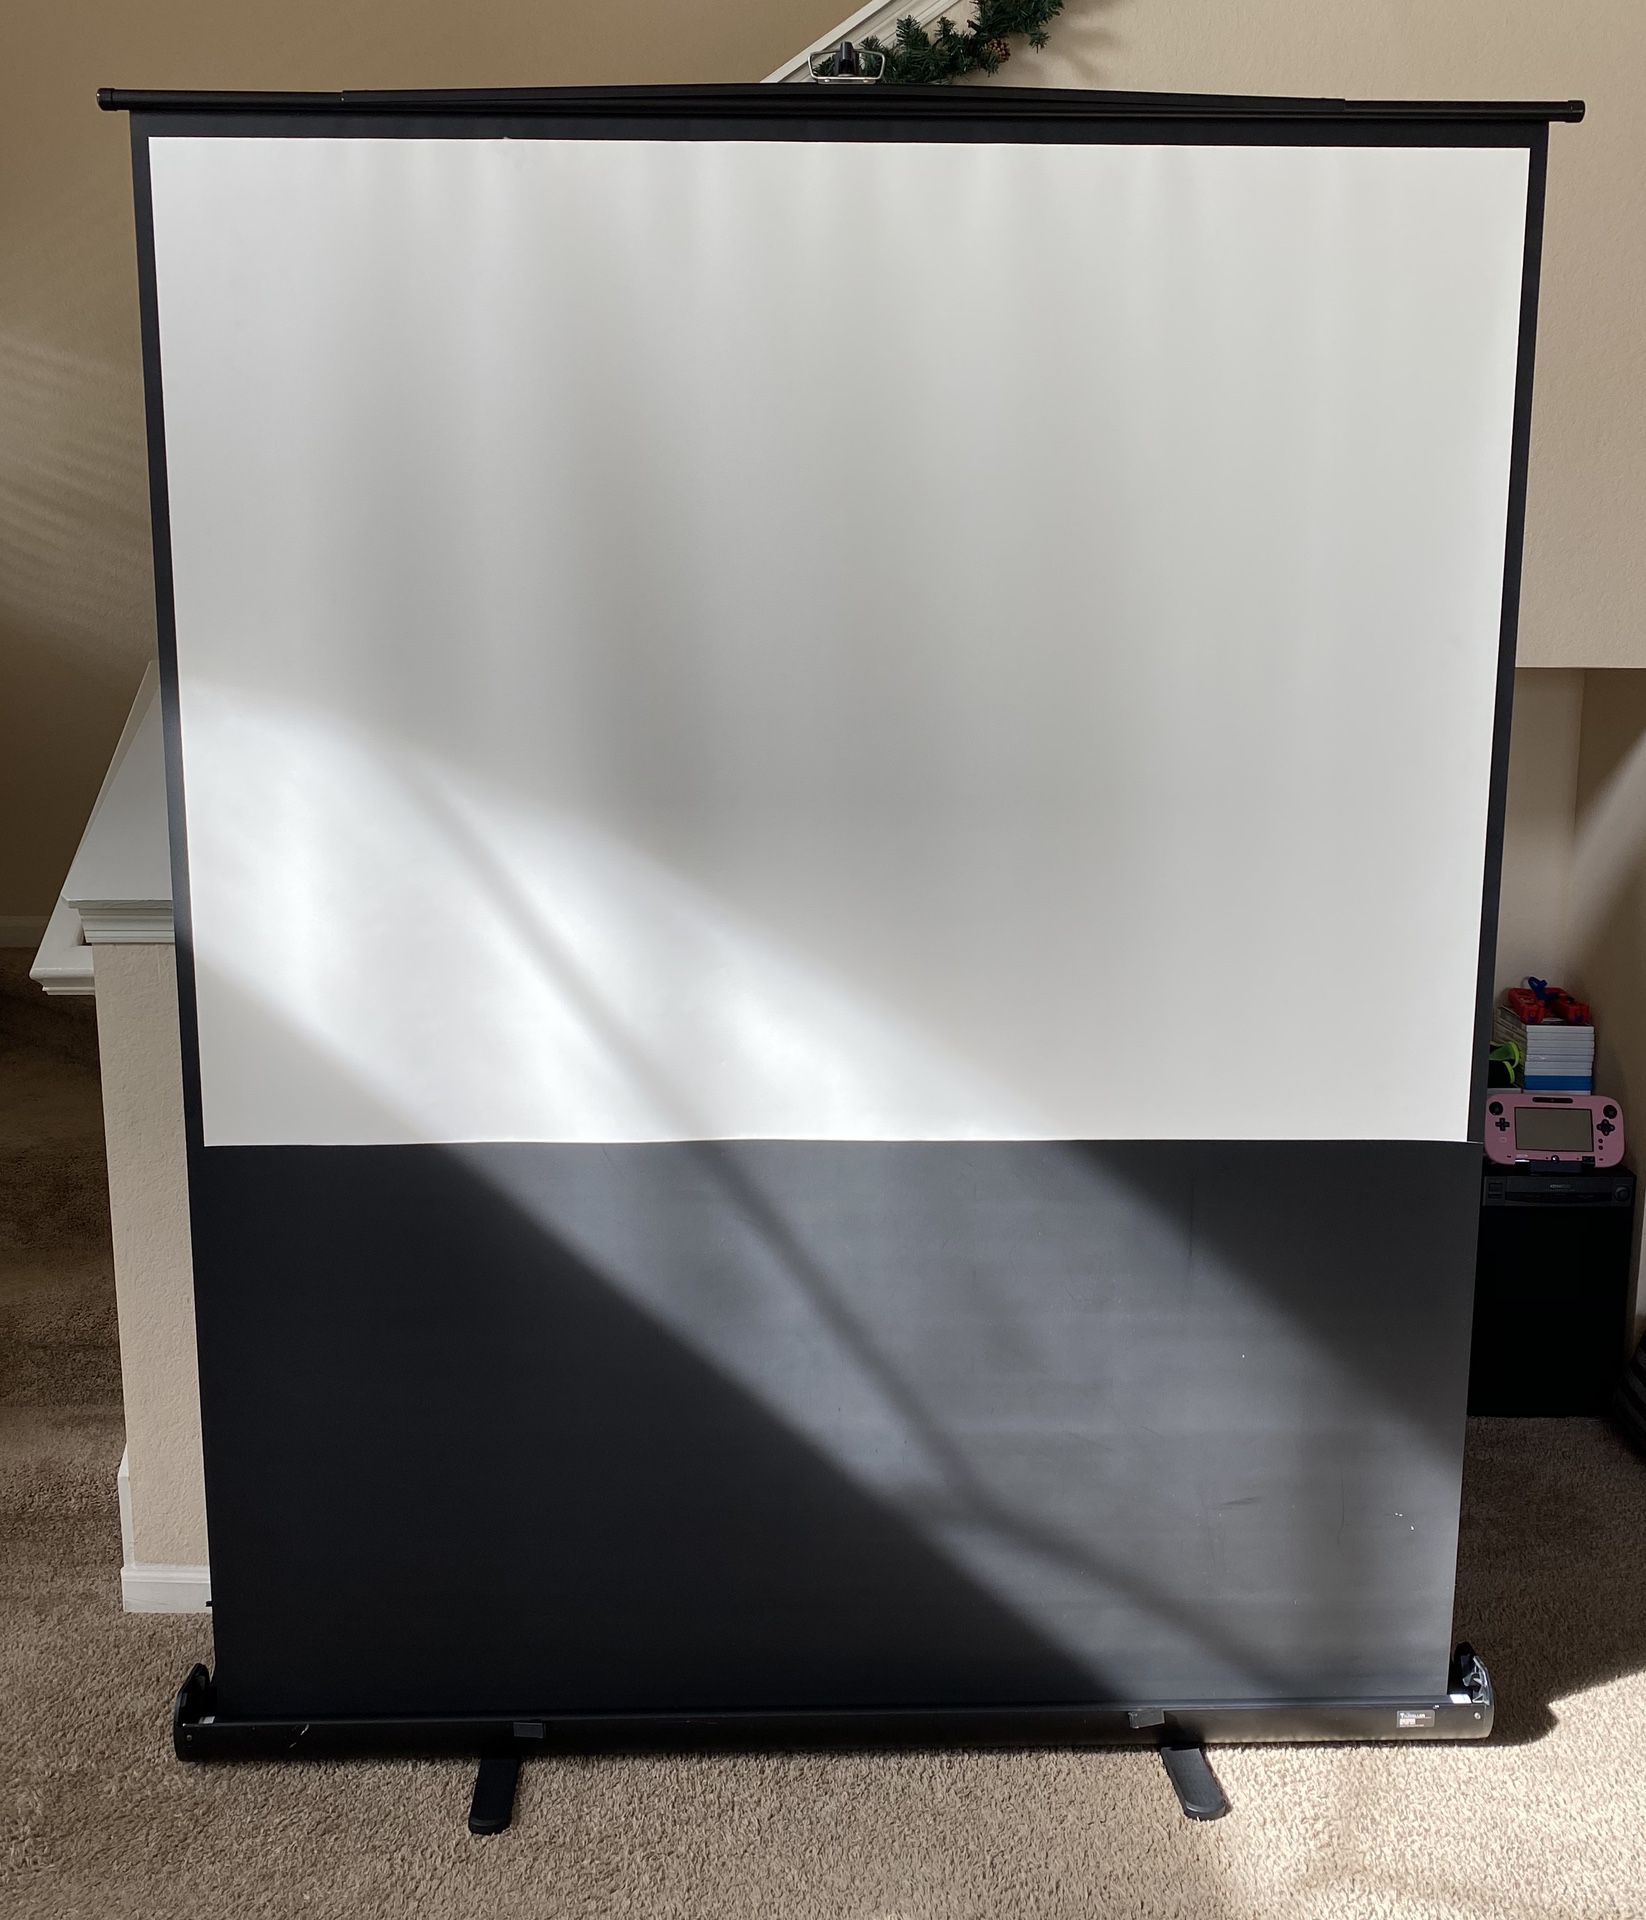 80-Inch wide Draper Professional Projection Screen with Cradle base in Excellent Conditions!